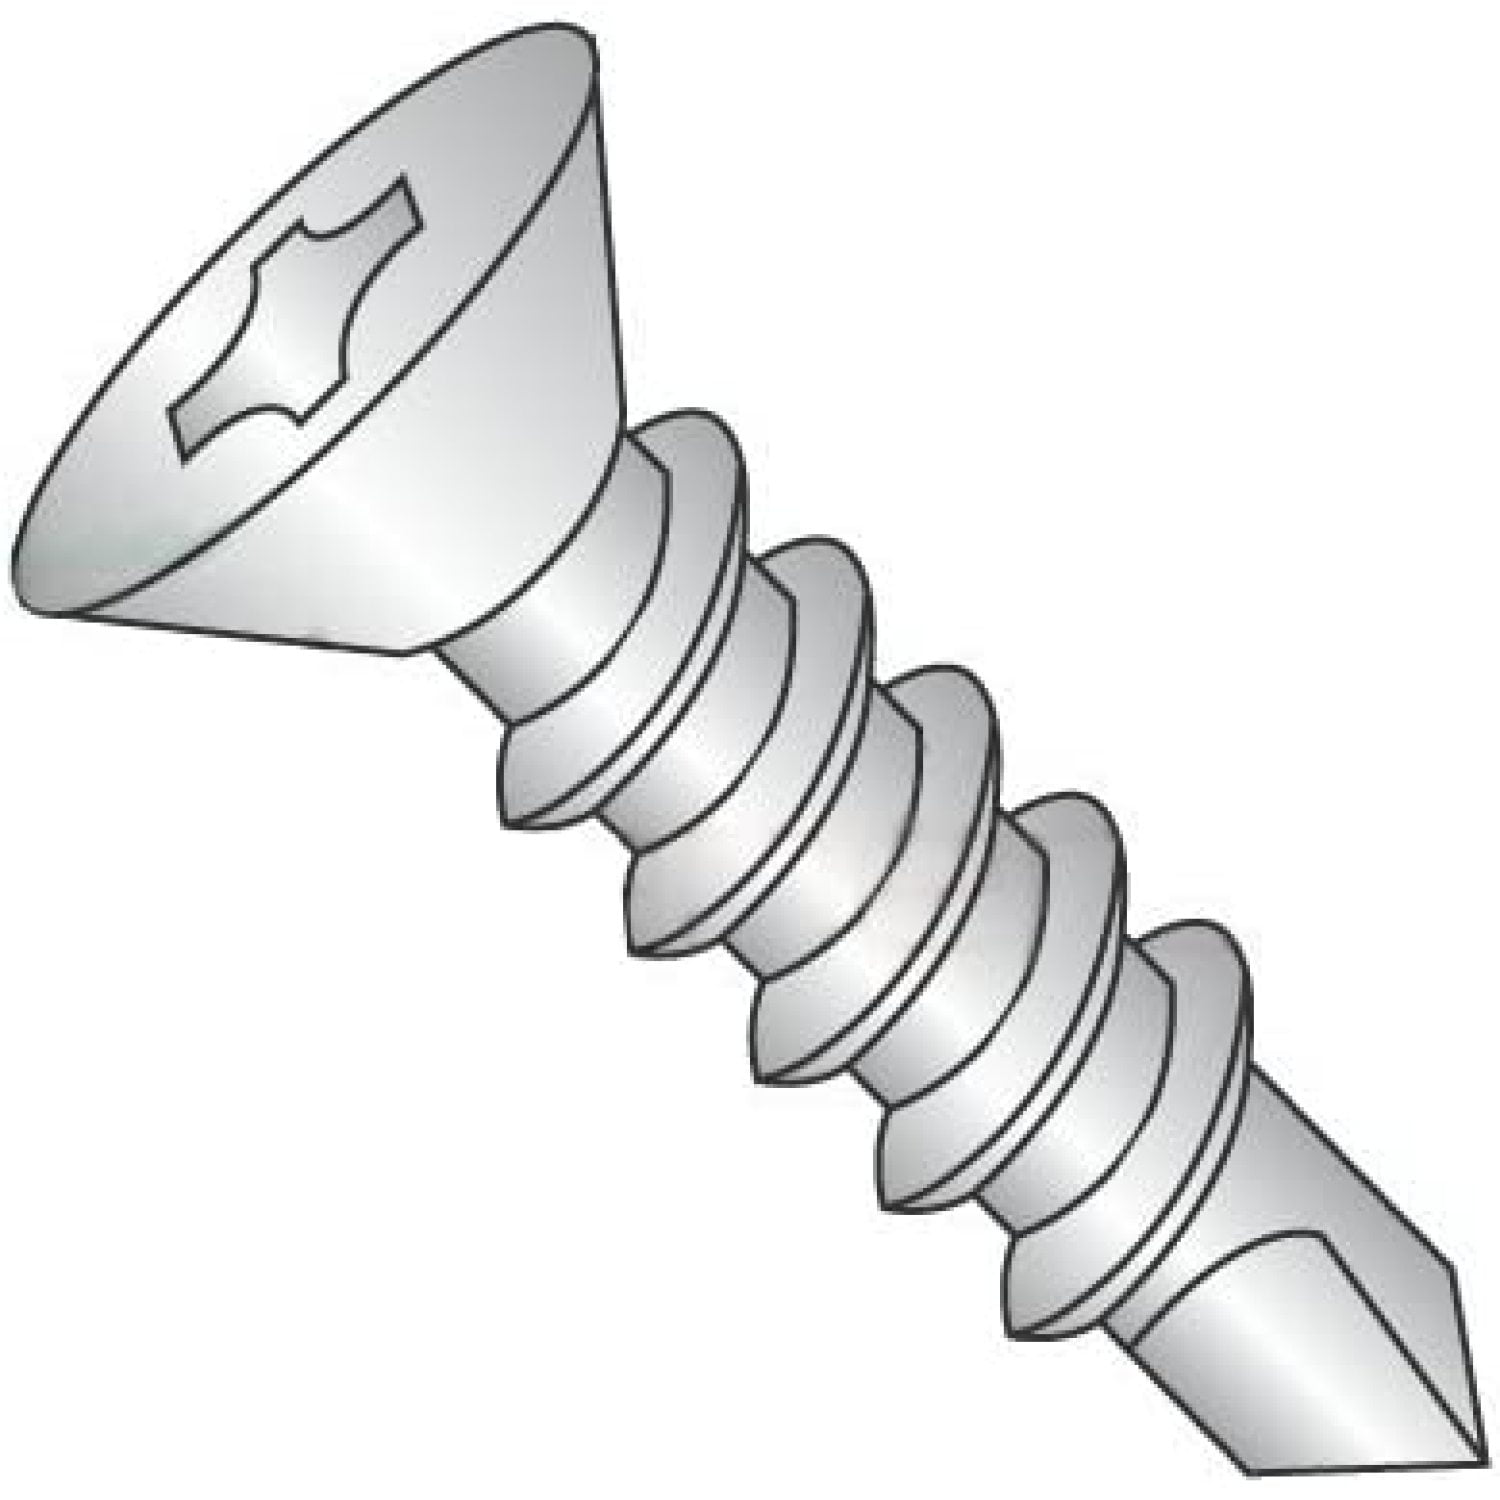 Stainless Steel Sheet Metal Screw, Plain Finish, Flat Head, Phillips Drive, Self-Drilling Point, 3/4 inch Length, #6-20 Threads (Pack of 100)